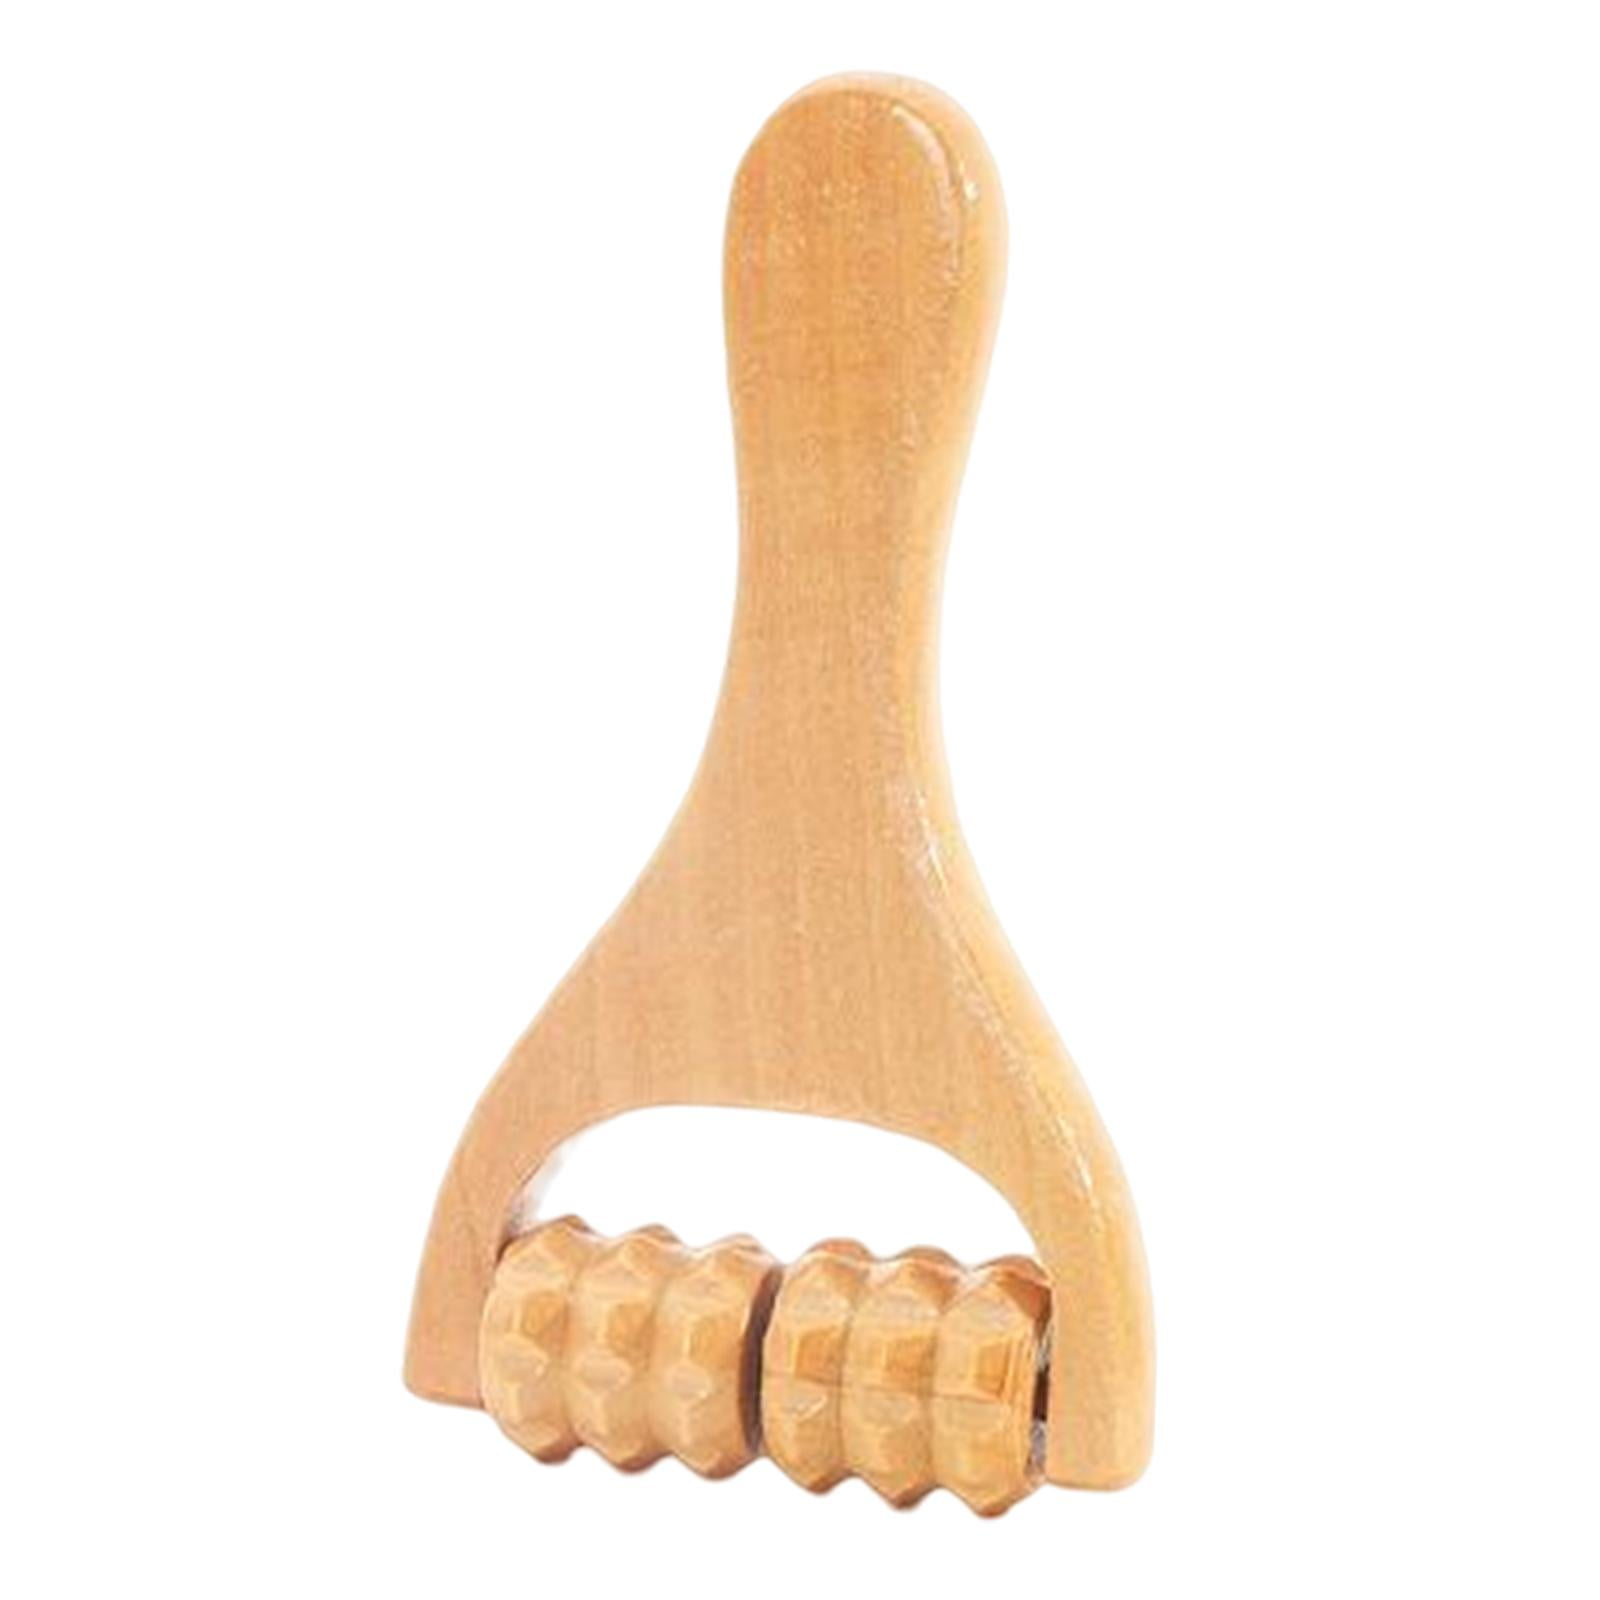 MANUAL WOODEN MASSAGER Tiny Comb Body Acupuncture Massage Tool